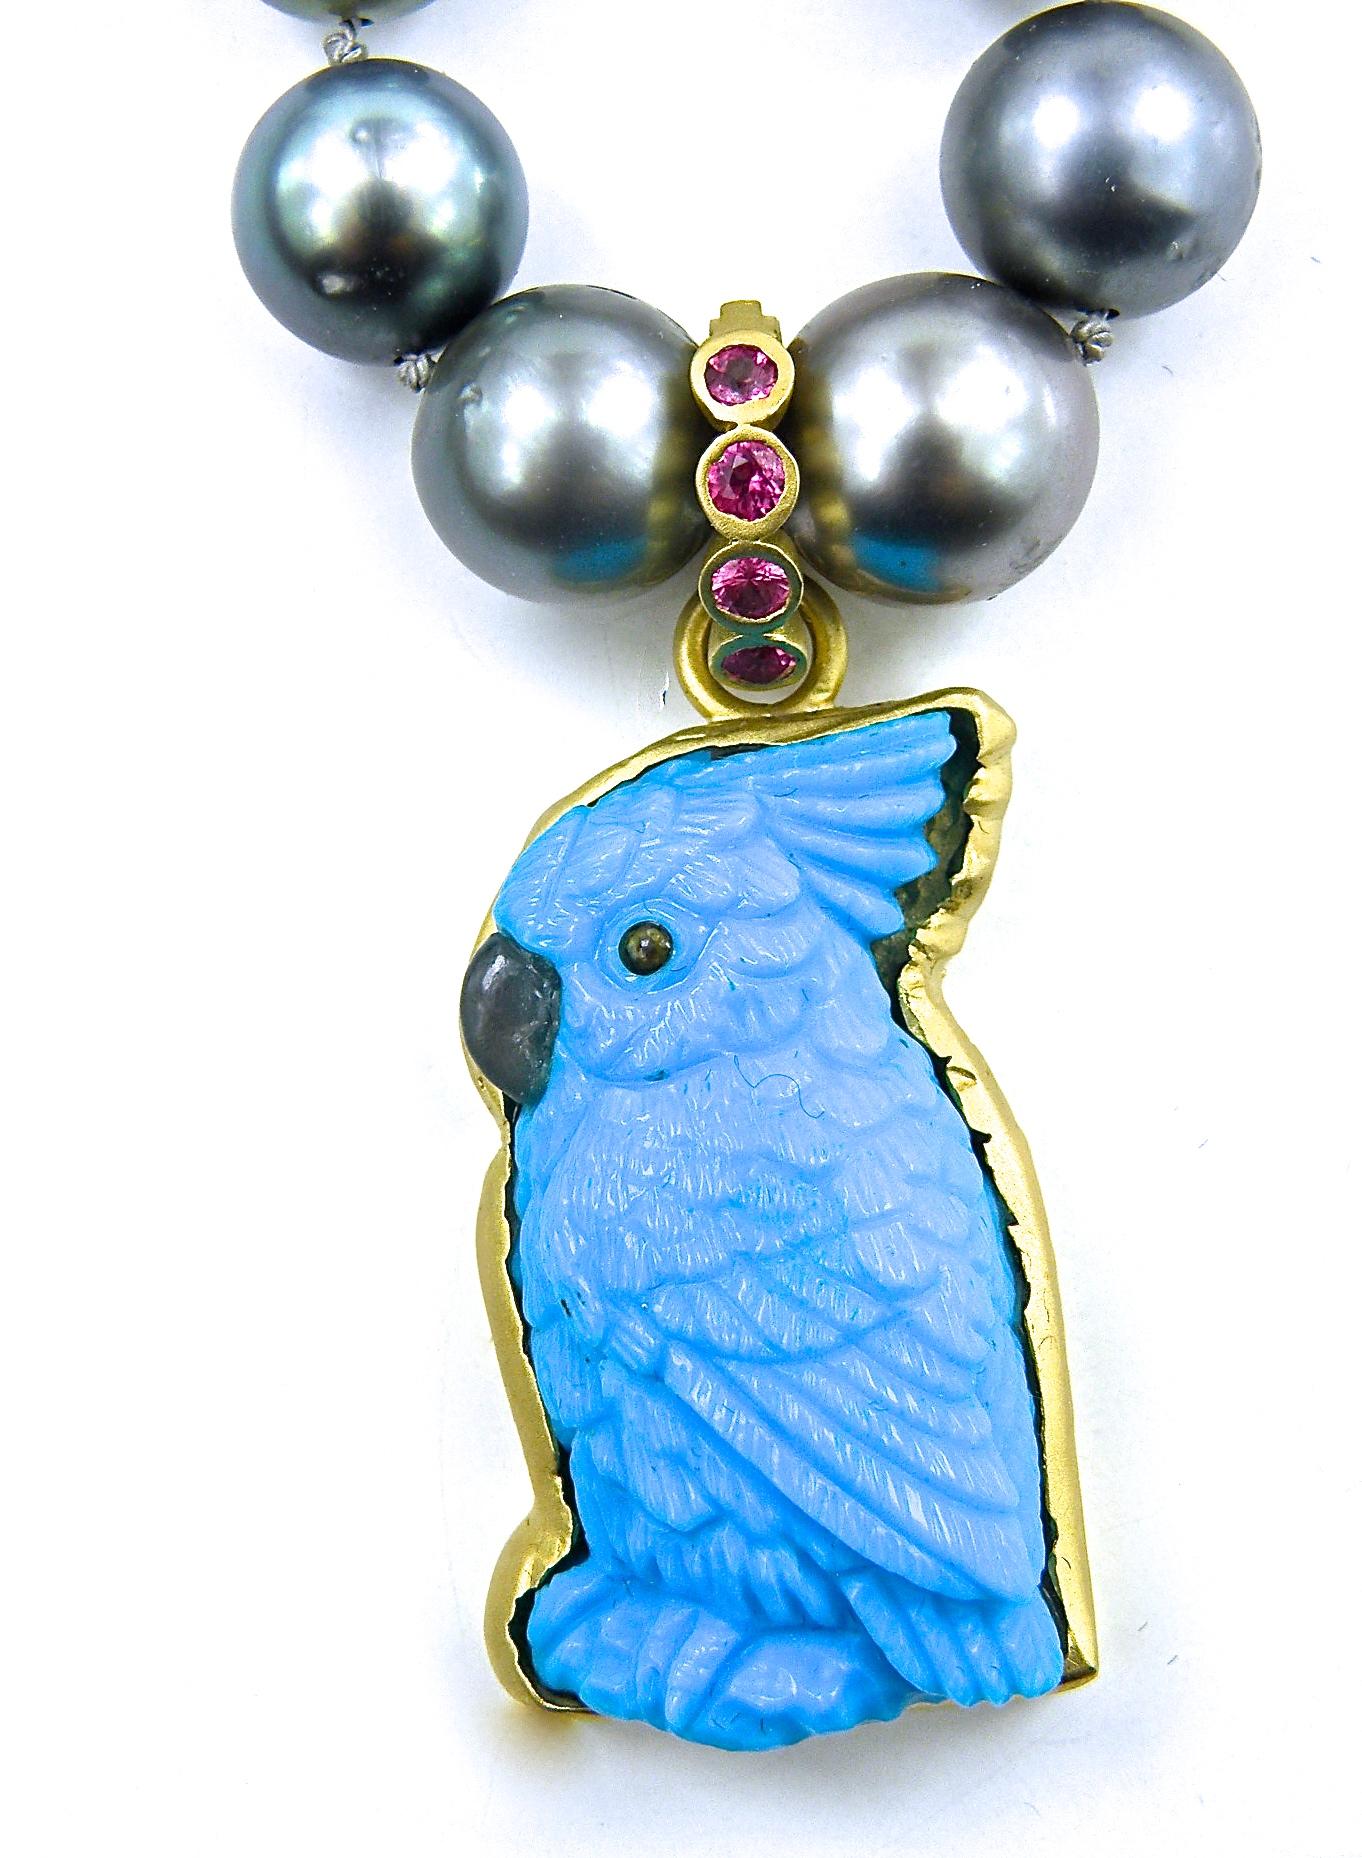 18 karat handcarved parrot in turquoise with detachable sapphire bail by Master Carver from Idar OBERSTEIN Approximate length 1 and 1/2 